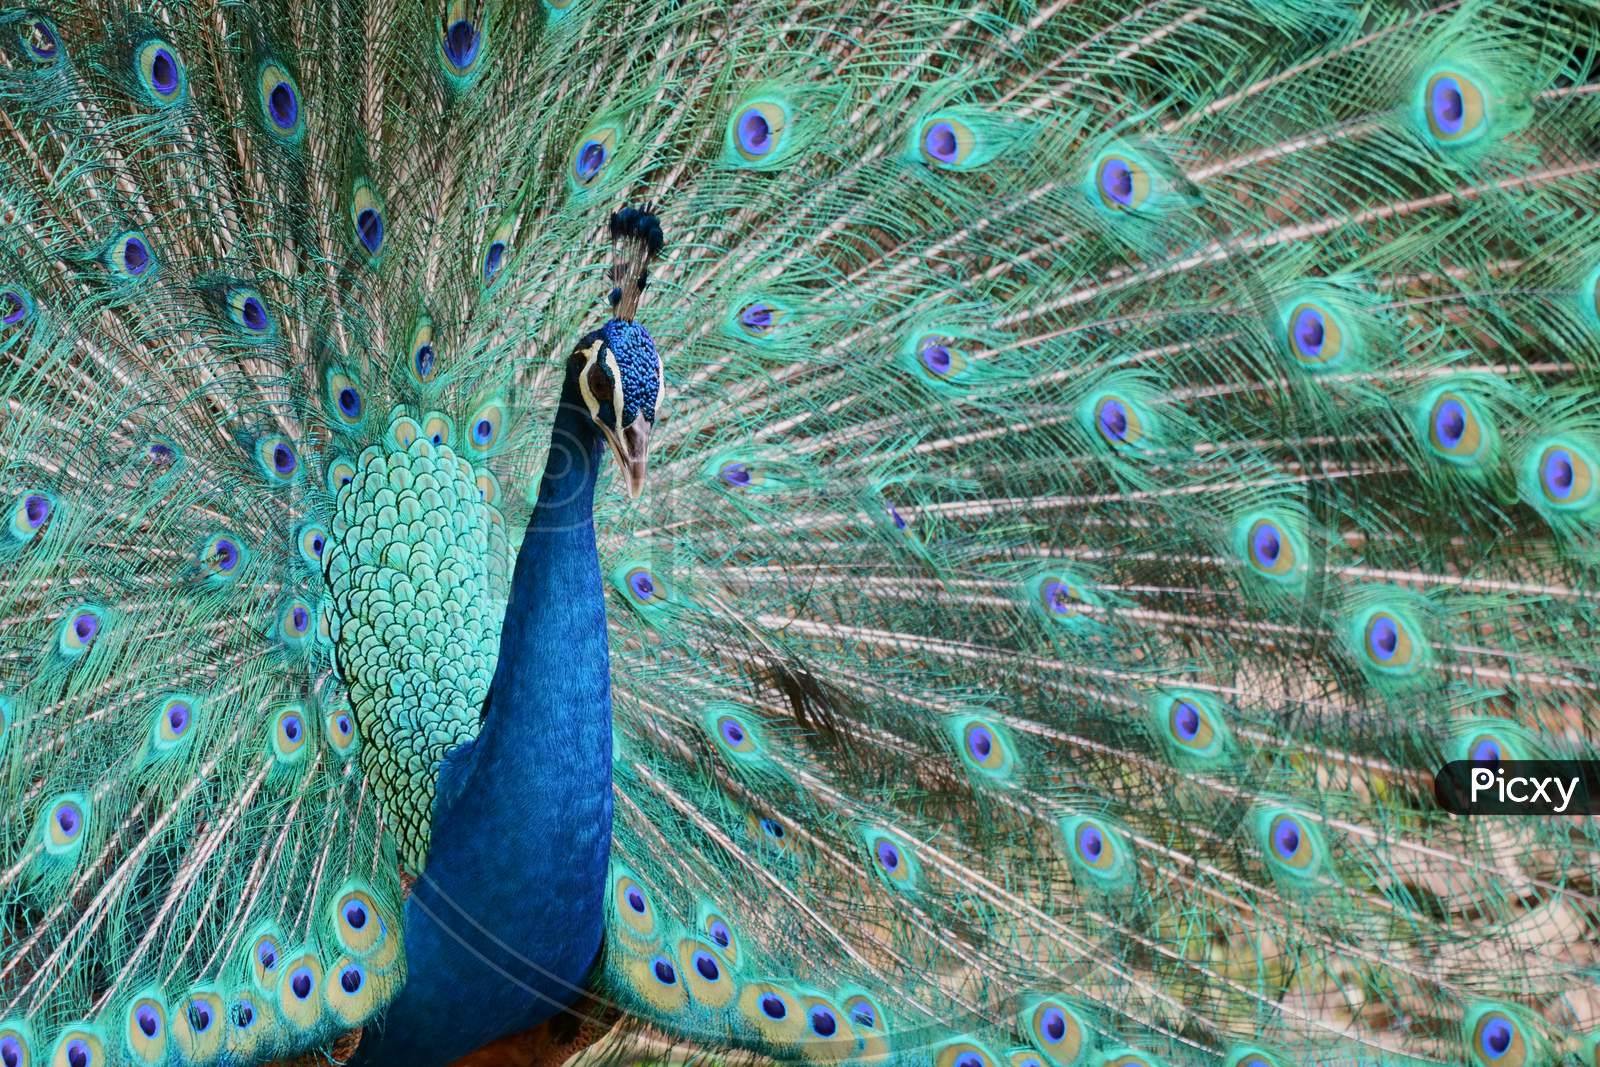 Beautiful peacock with its feathers spread out